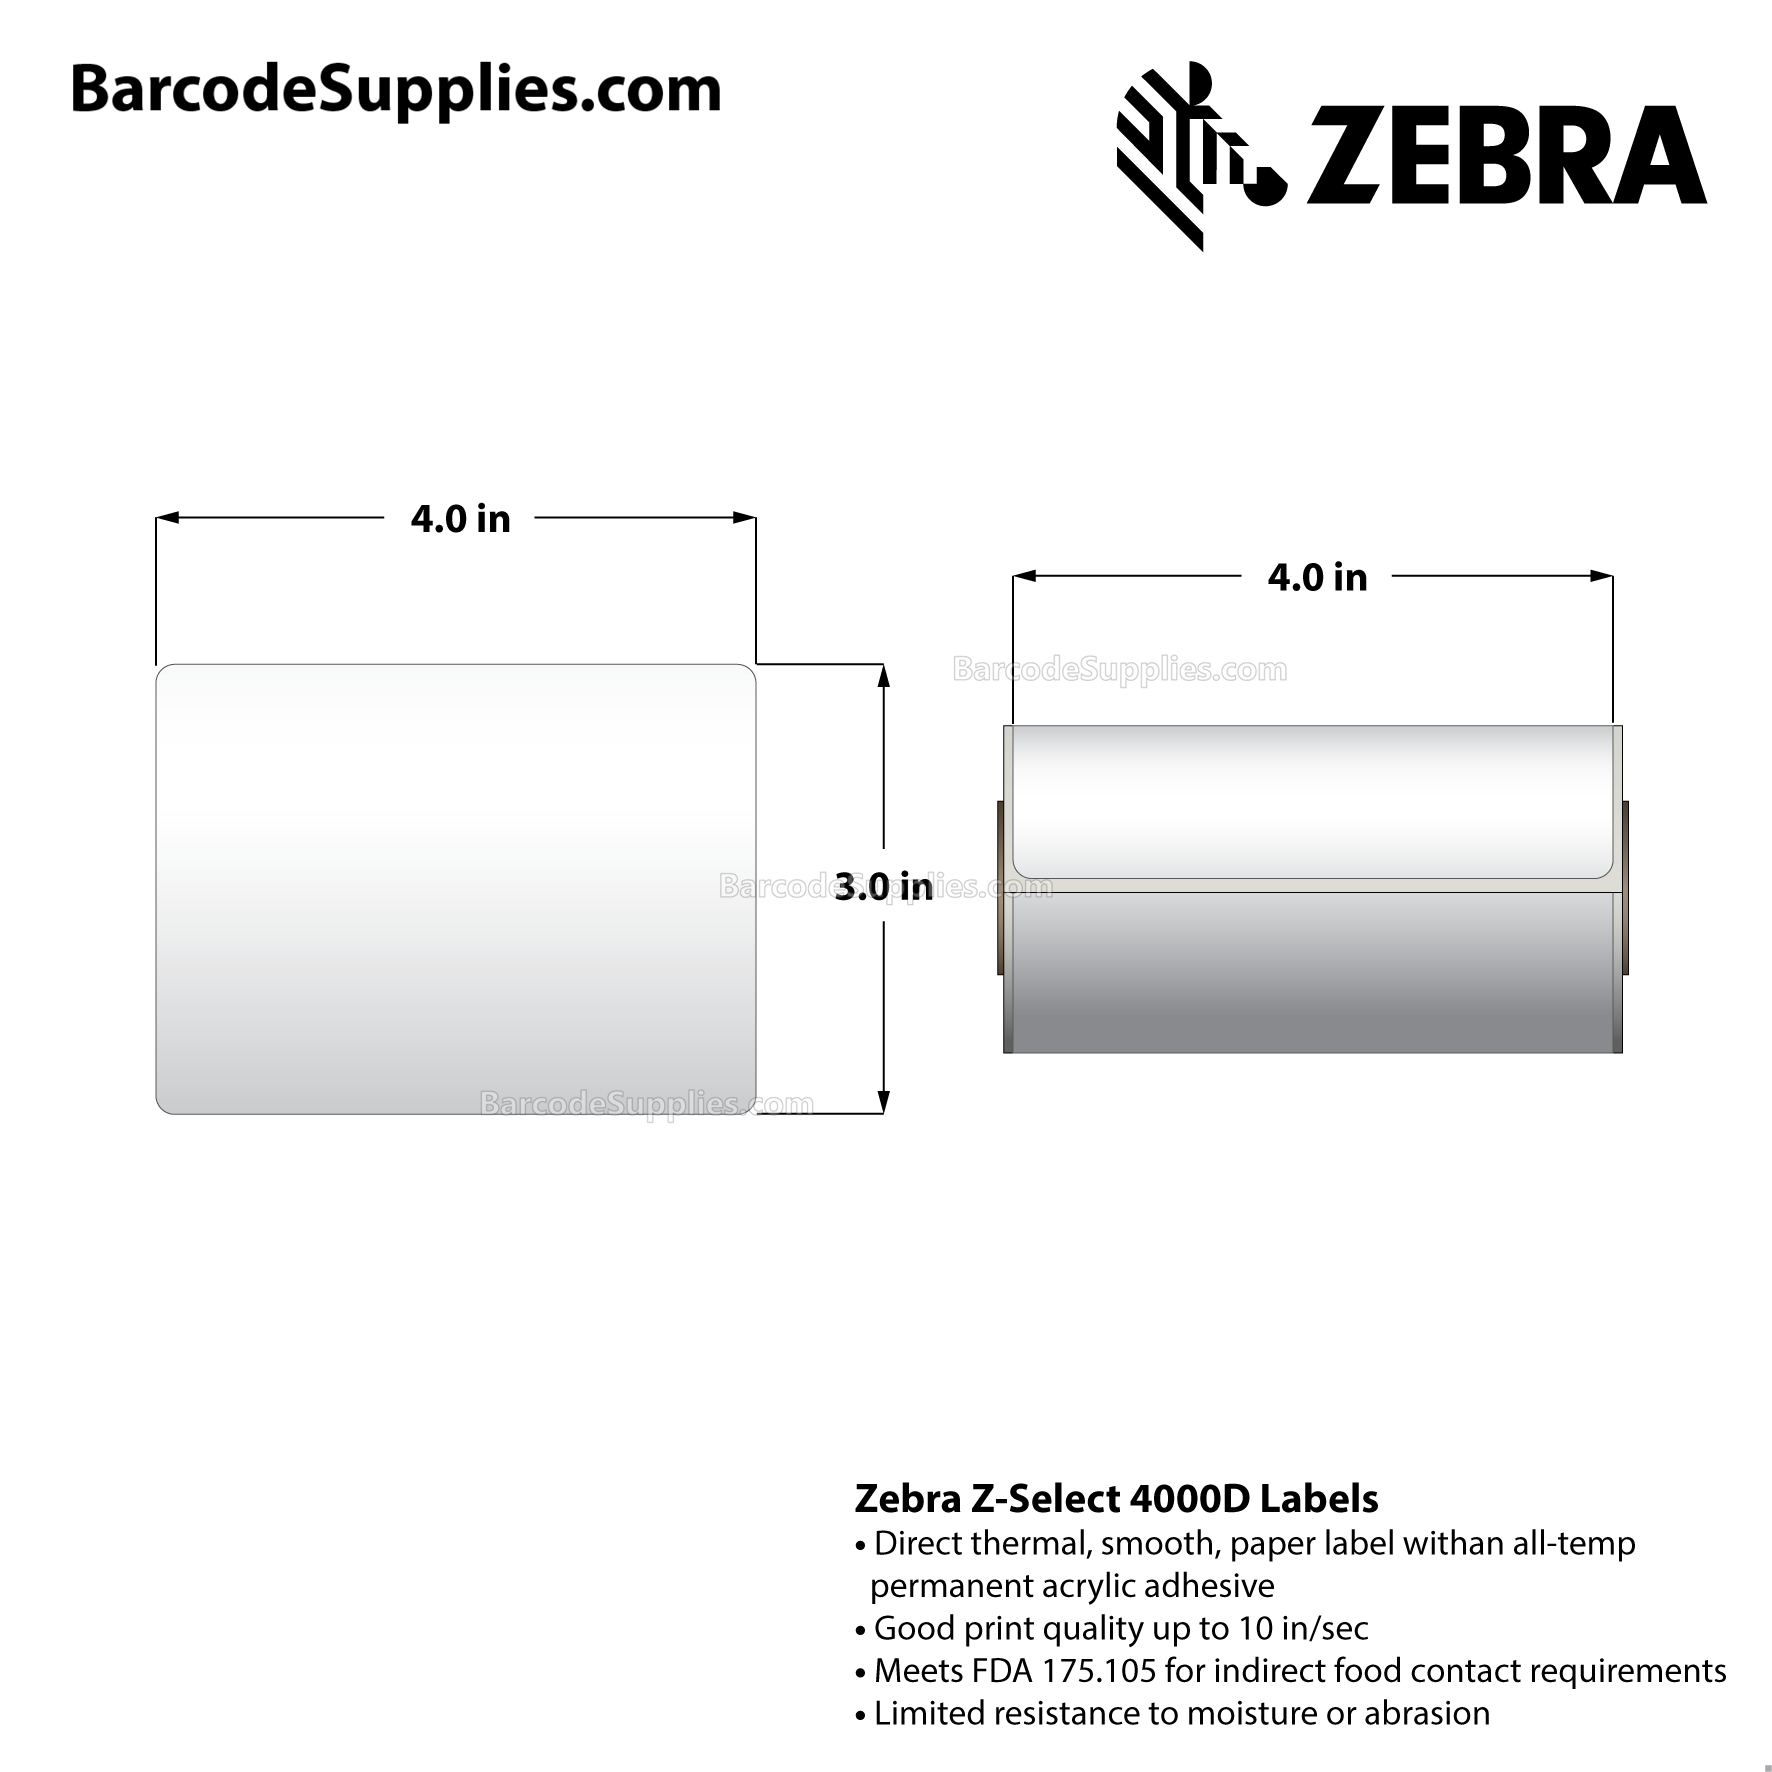 4 x 3 Direct Thermal White Z-Select 4000D Labels With All-Temp Adhesive - Perforated - 110 Labels Per Roll - Carton Of 12 Rolls - 1320 Labels Total - MPN: 800340-305